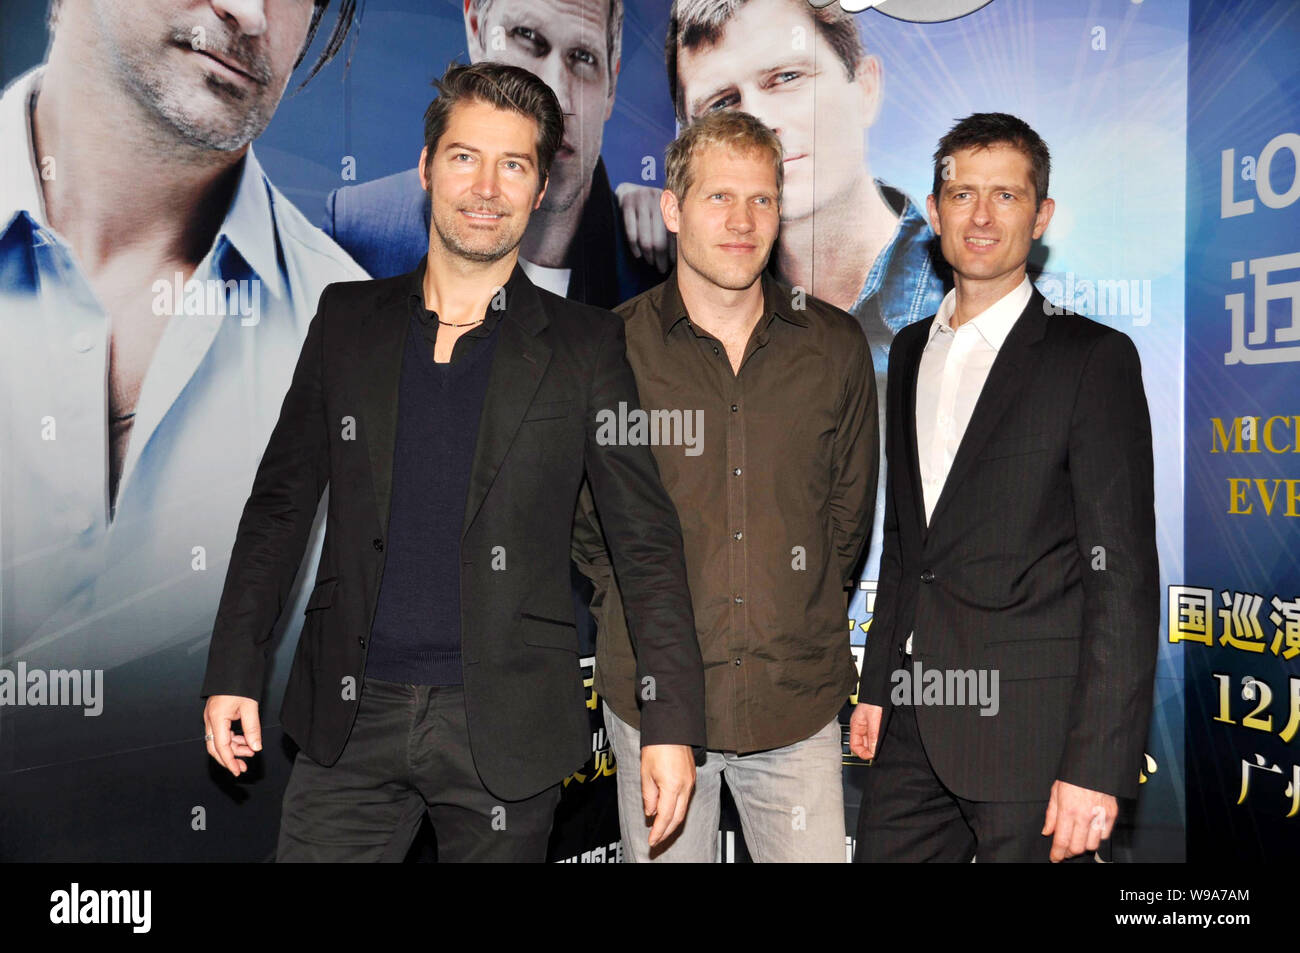 Danish rock band Michael Learns to Rock, known as MLTR, attends a meeting with Chinese fans in Shanghai, China, 6 December 2010.   Michael Learns to R Stock Photo